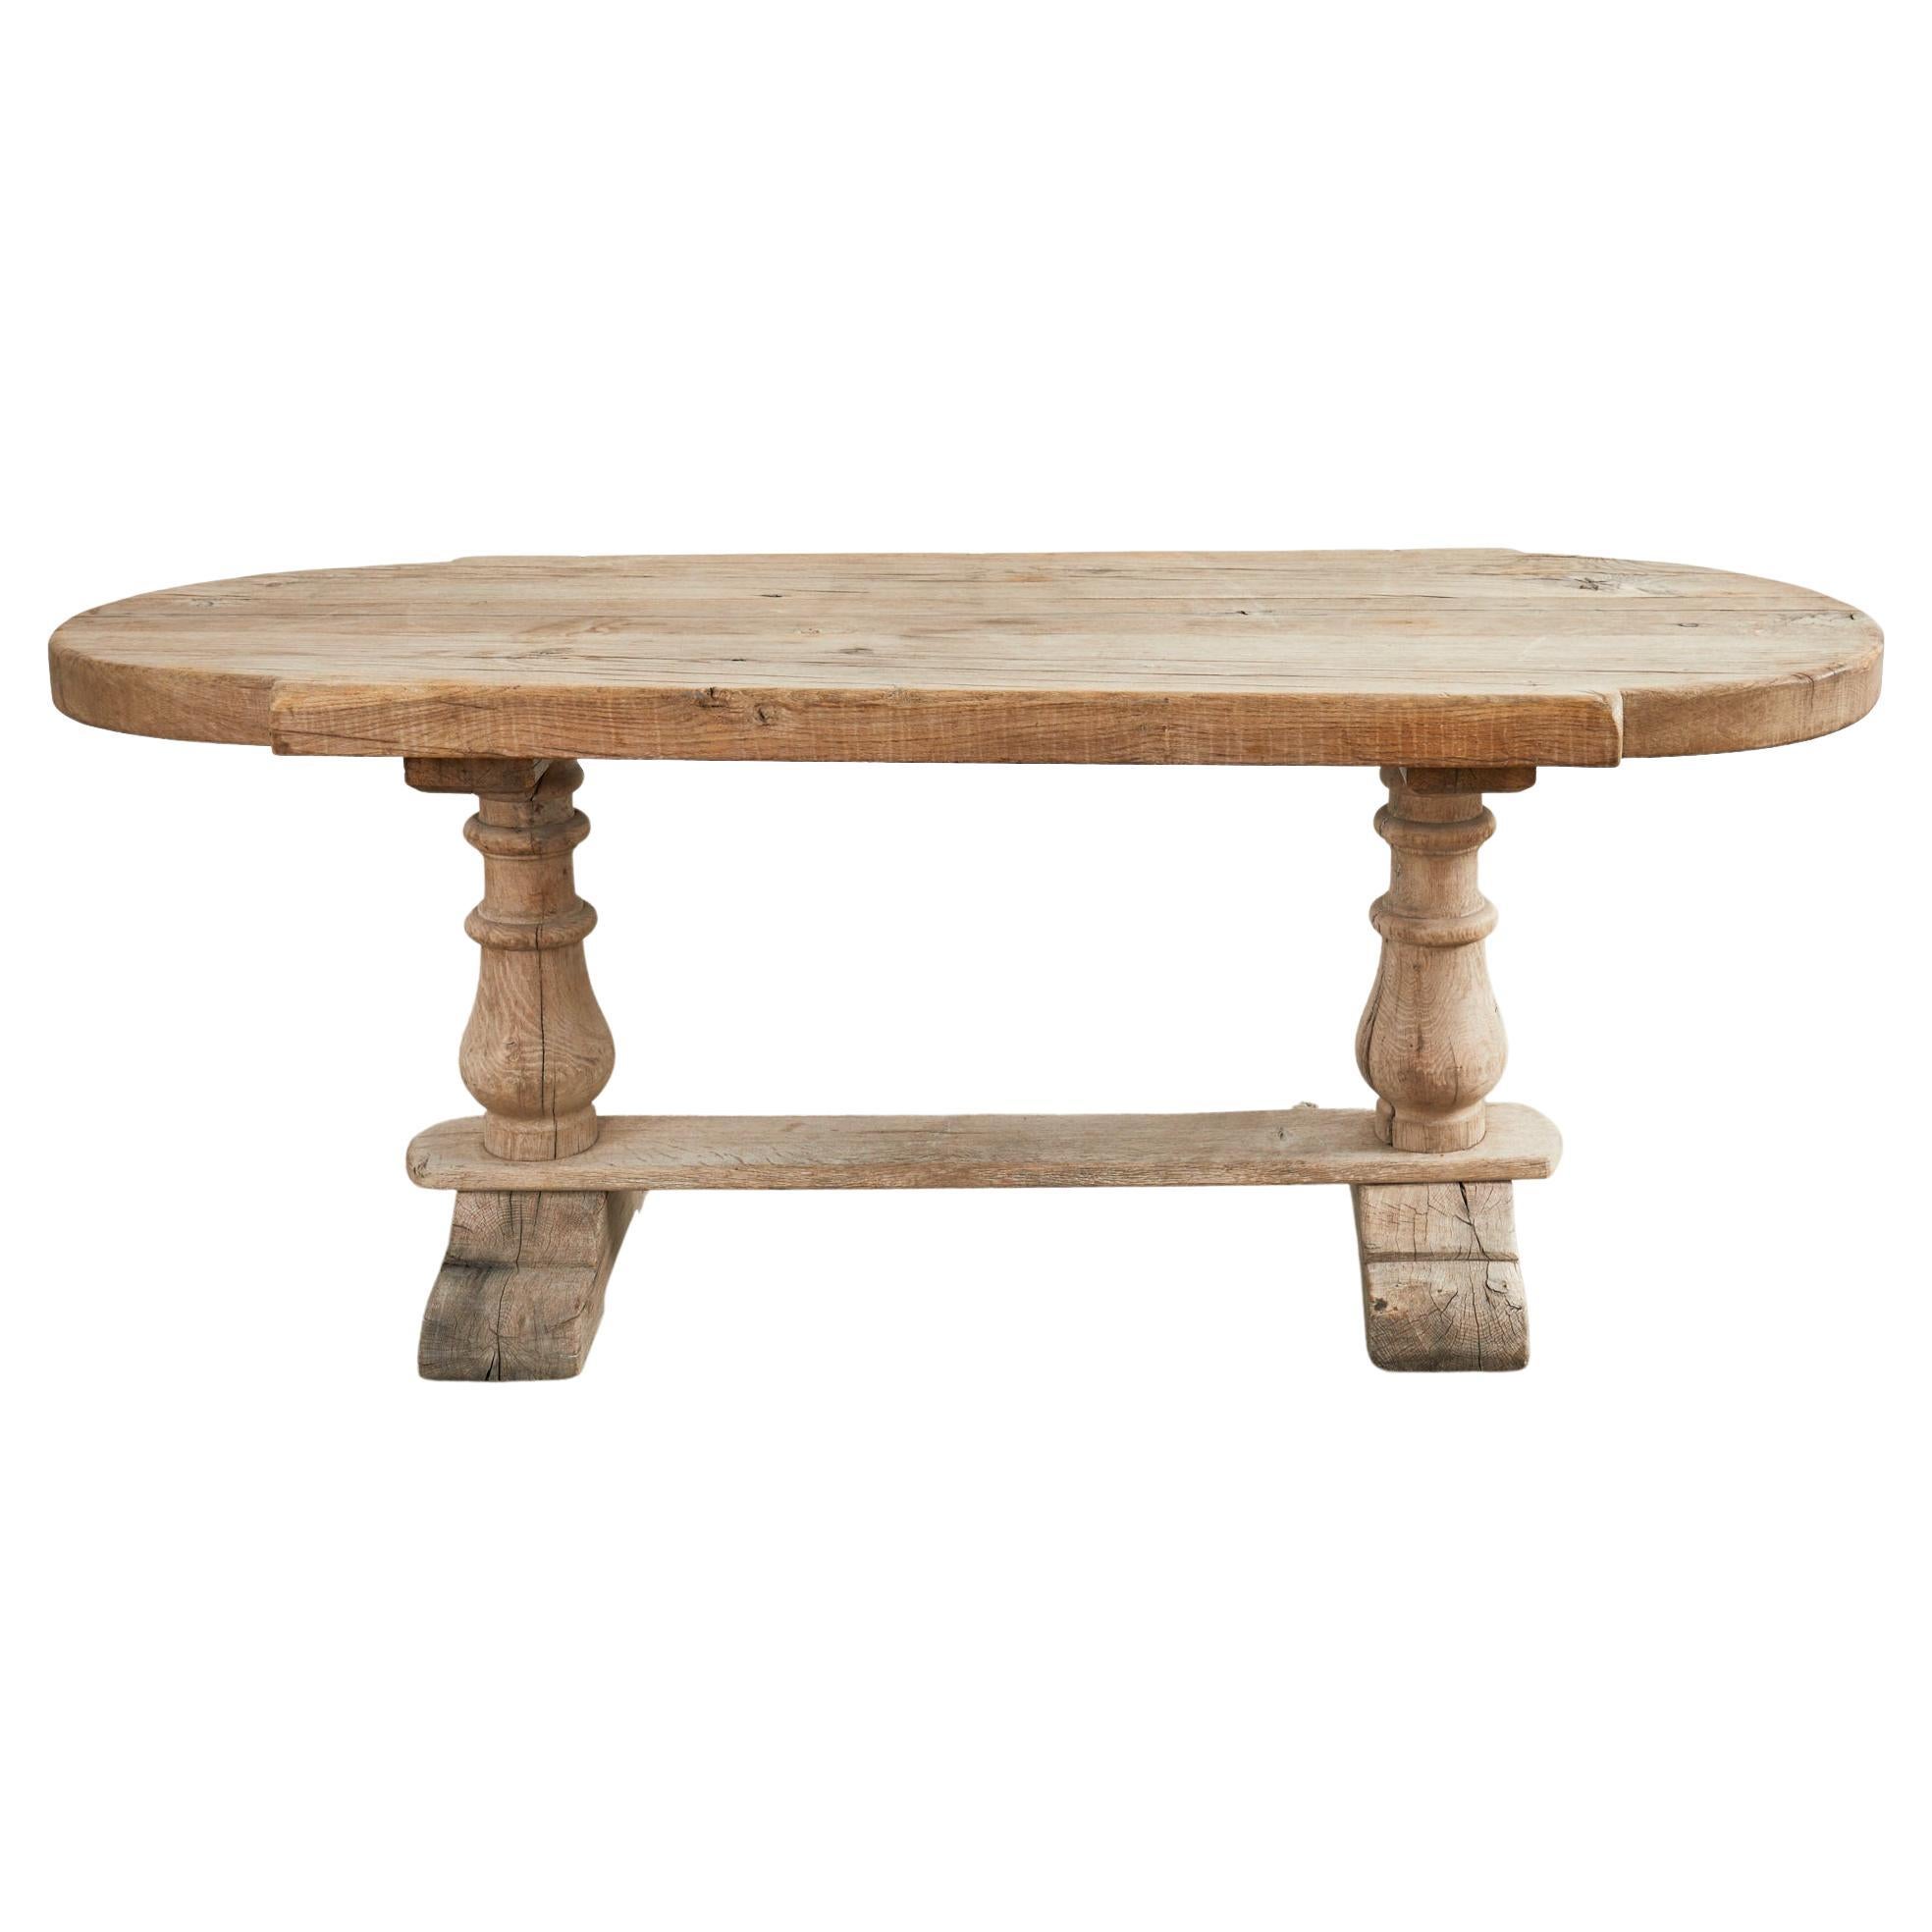 Country French Bleached Oak Farmhouse Dining Table Demilune Ends